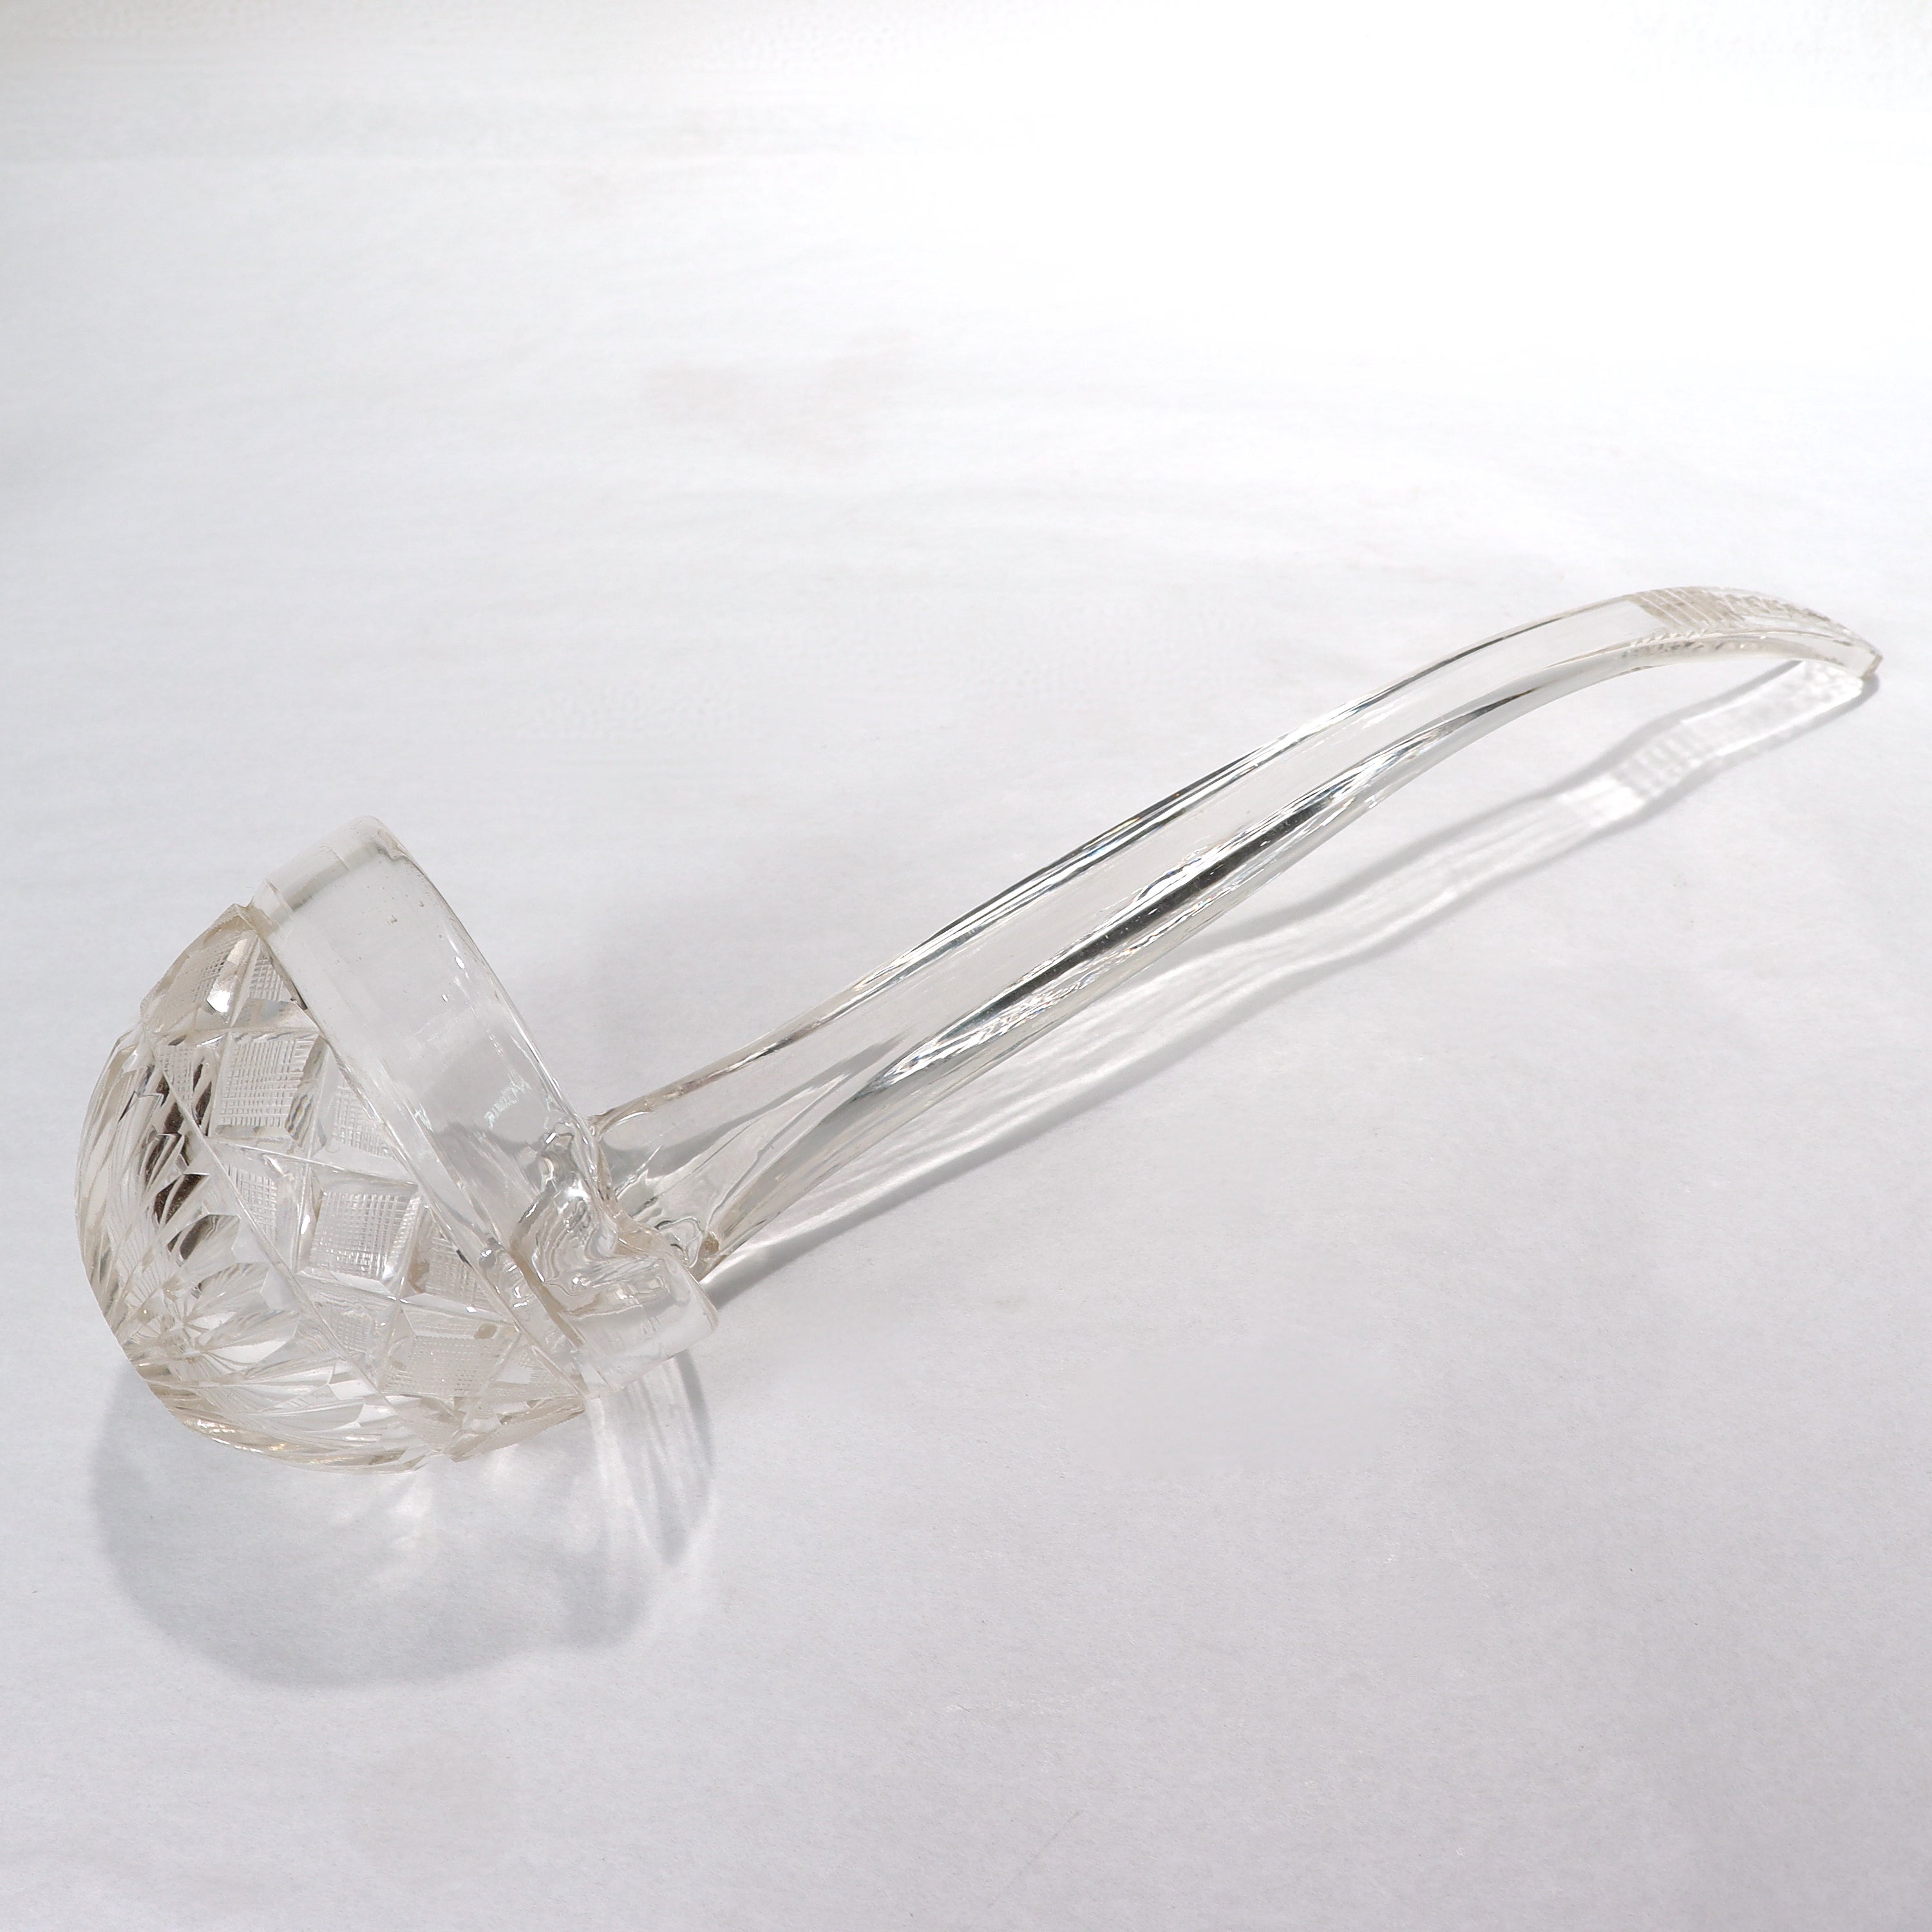 A fine and rare antique 19th century cut glass punch ladle.

With cut decoration to both bowl and handle.

(Possibly a Pittsburgh variant?)

Simply a rare form!

Date:
Early to Mid 19th Century

Overall Condition:
It is in overall good, as-pictured,